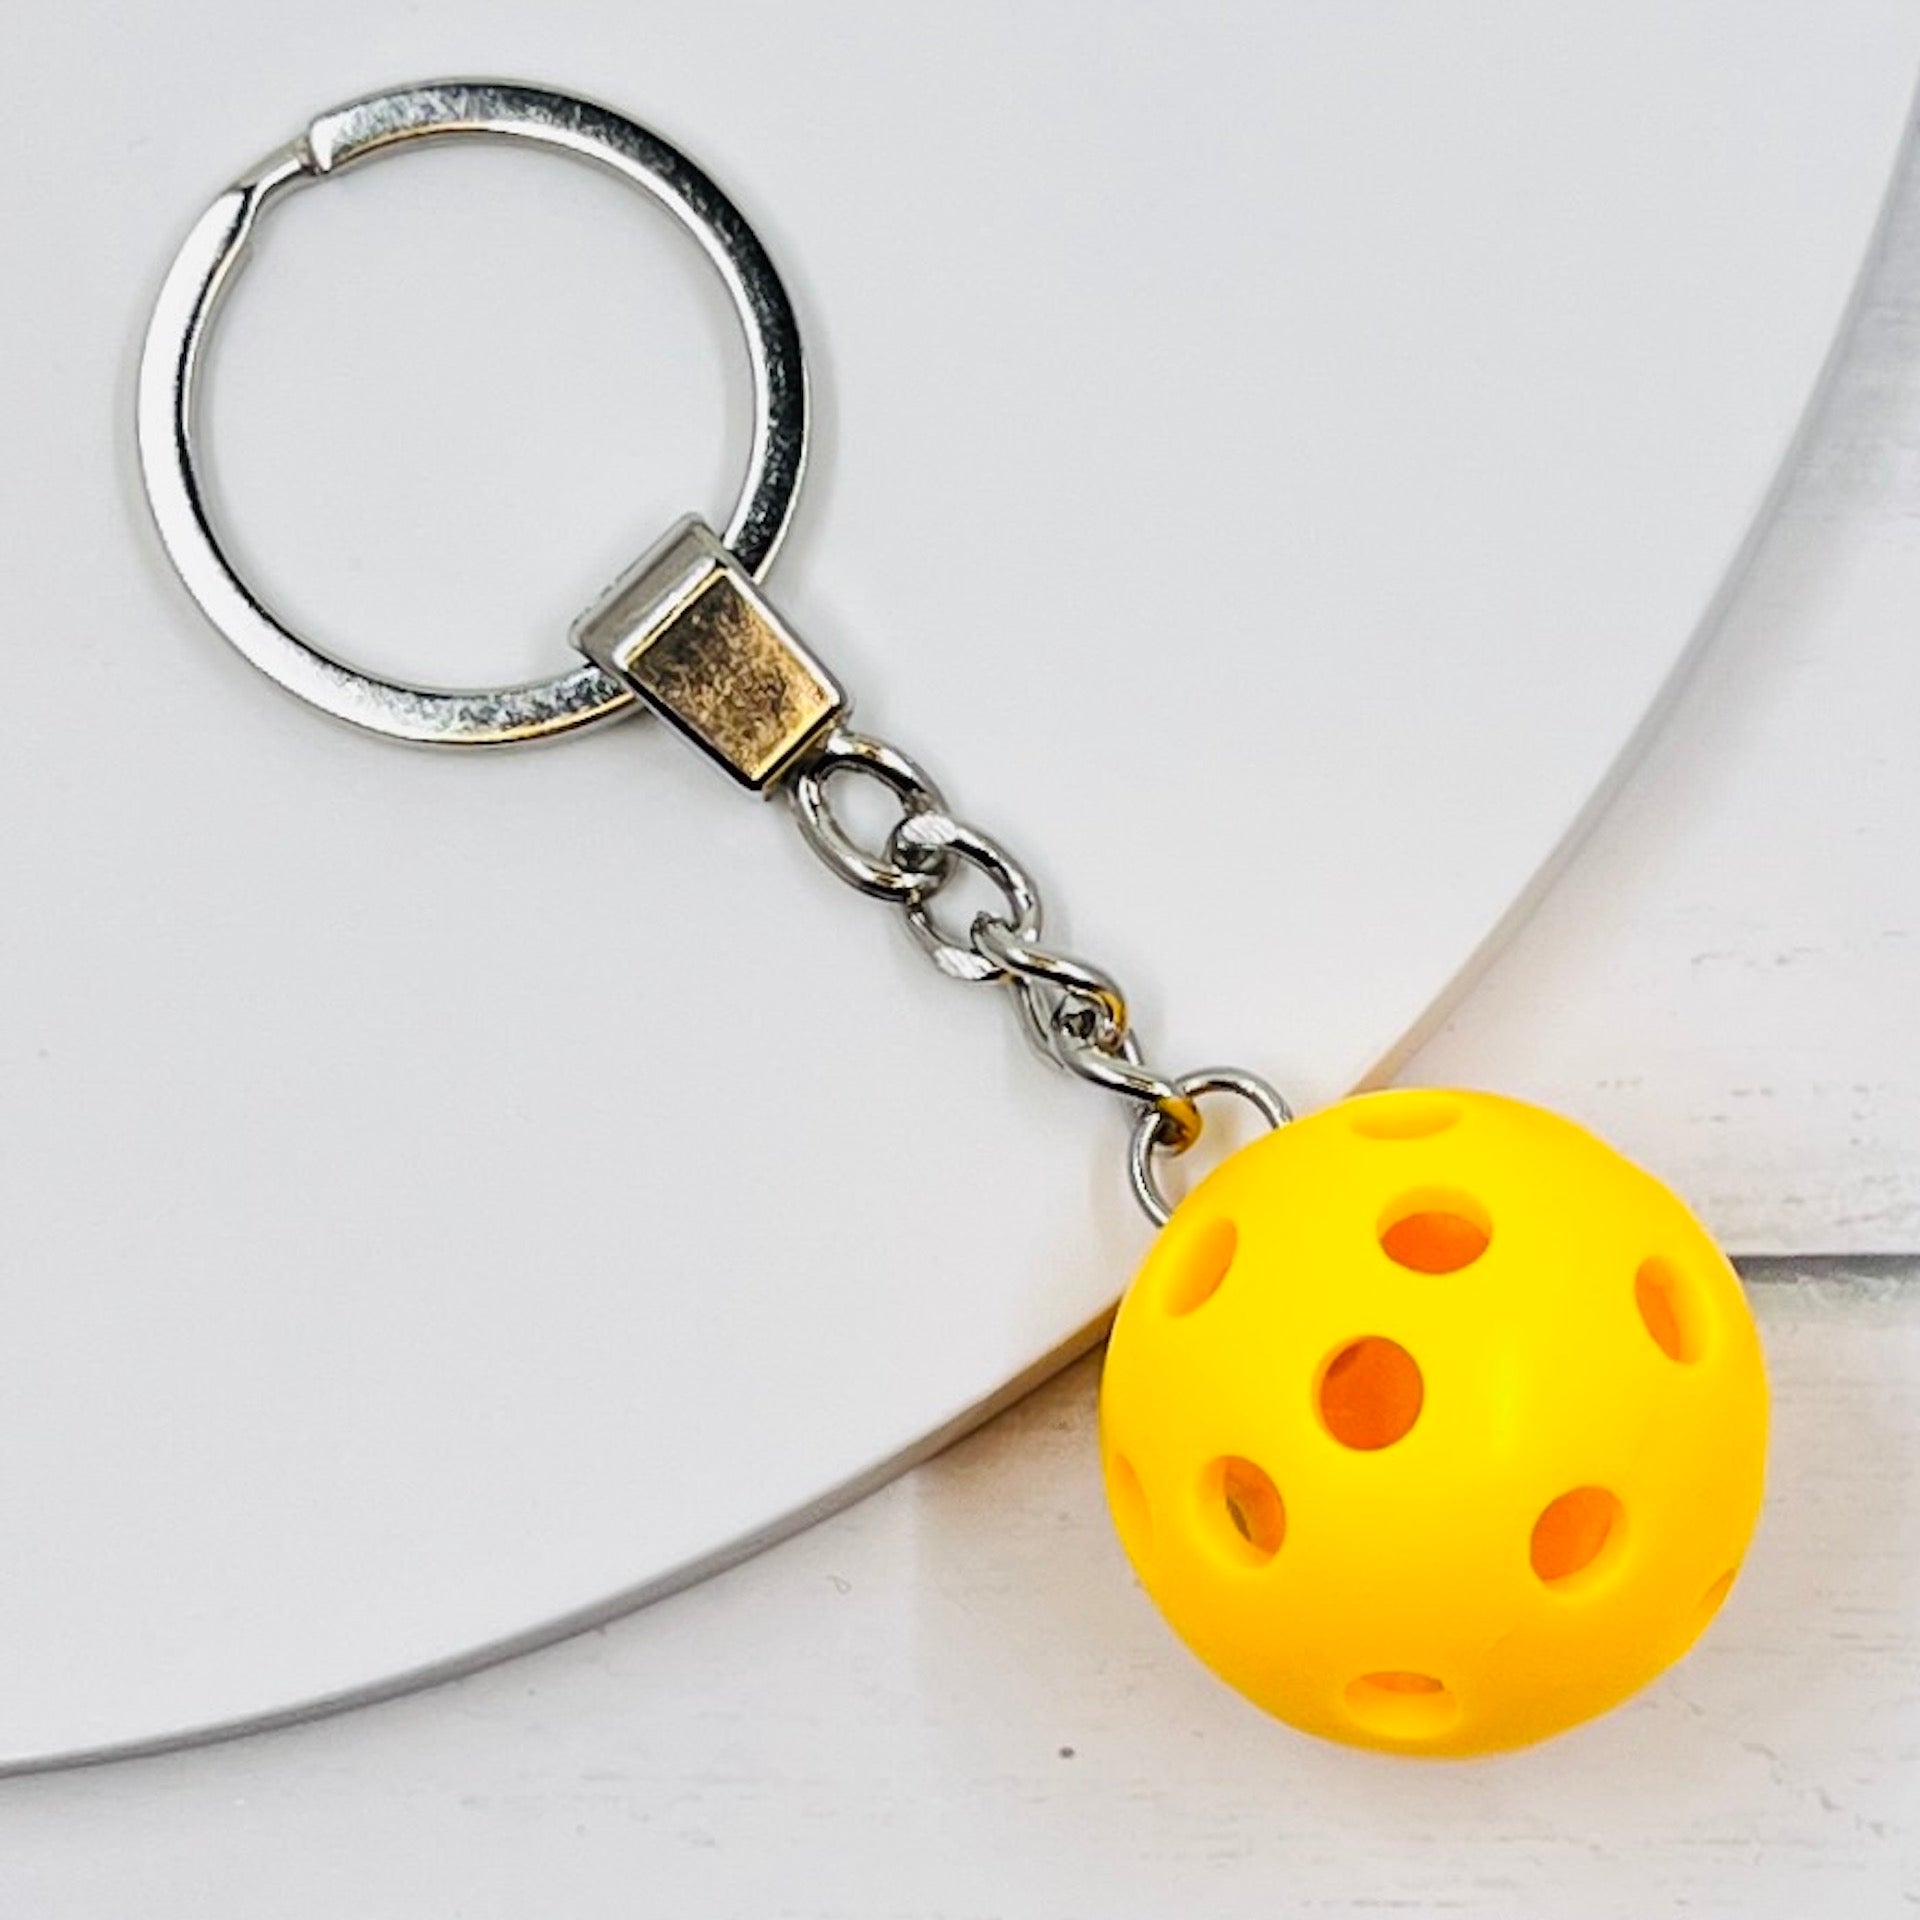 Heavy Duty Micro Pickleball Bags Tags/Pulls  Each order gets you 1 of the cutest little pickleball and heavy duty chains! The micro pickleballs measure about 1 inch and are used as bag tag markers. Fun for any bag, especially your pickleball bag!! The balls come in 4 colors: Red, Green, Blue, and Yellow. Choose from 4 fun colors.